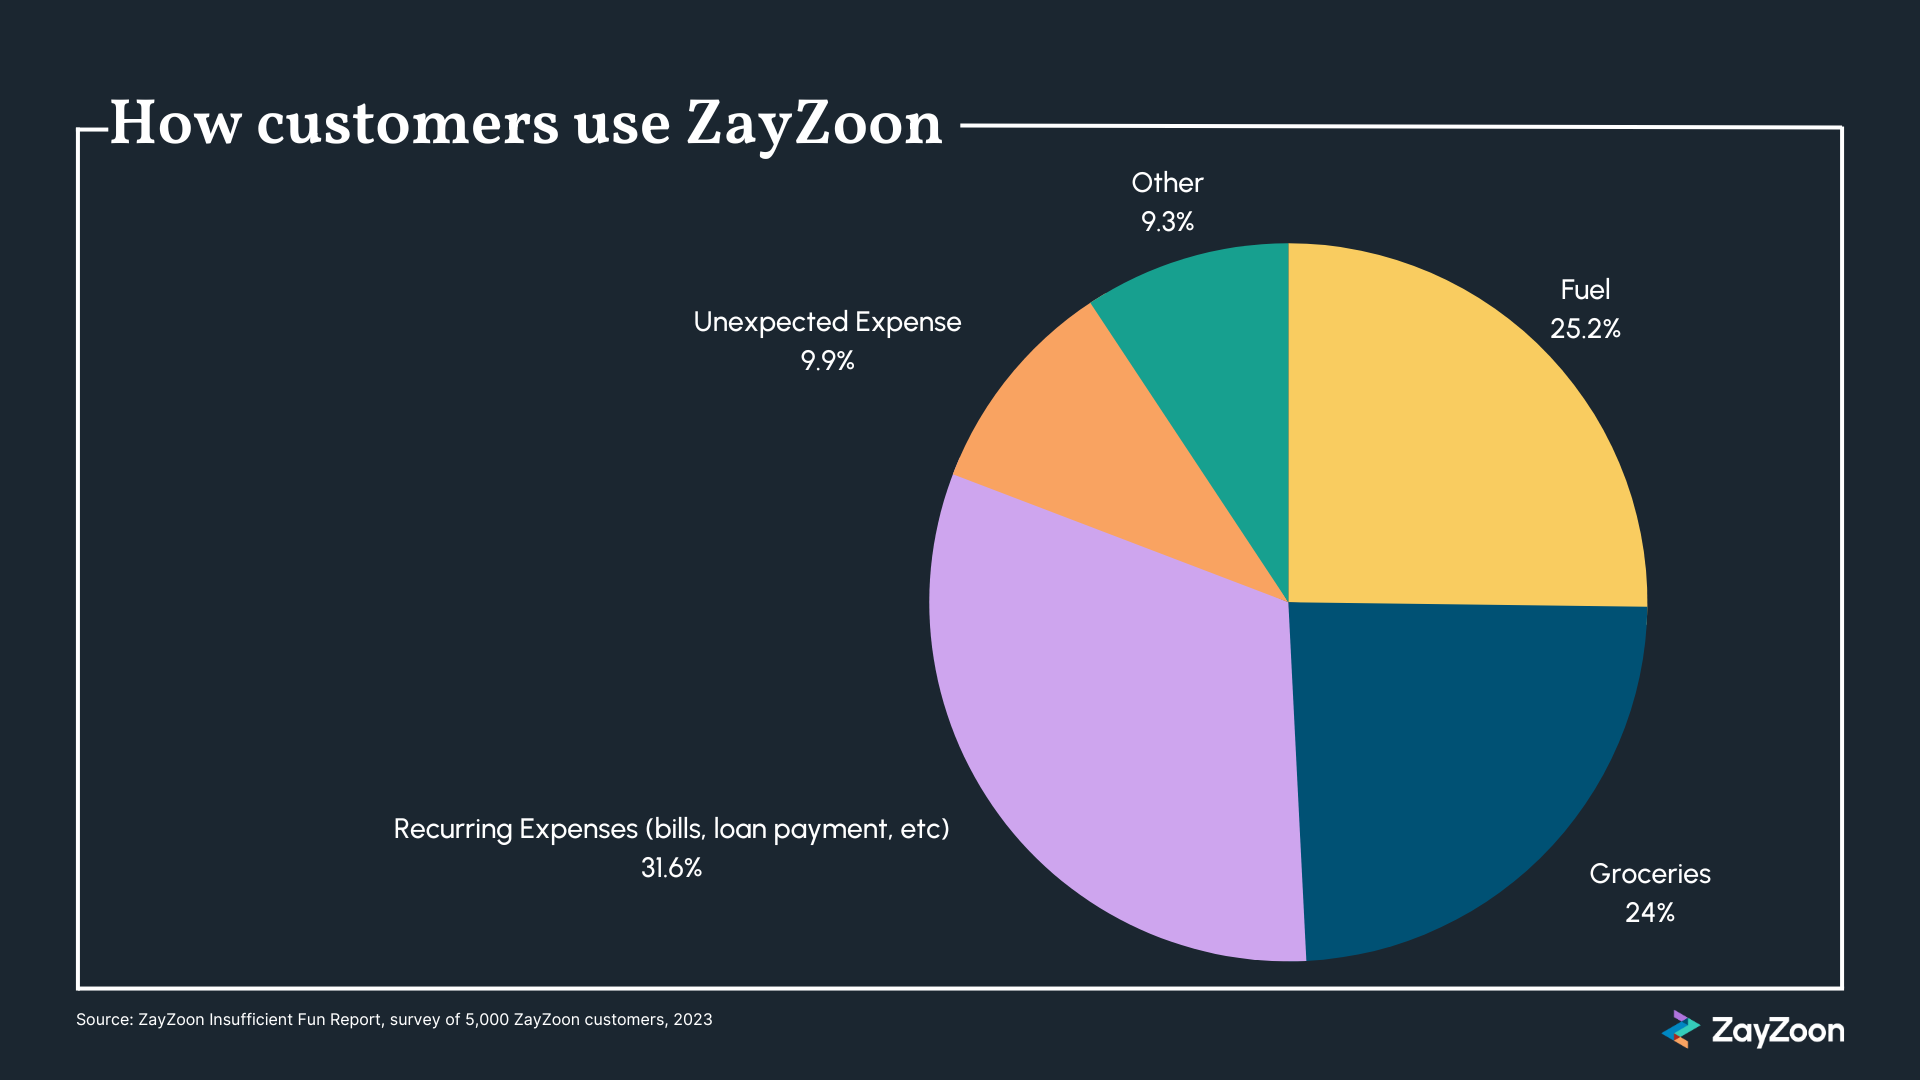 A pie chart breaks down how customers use ZayZoon between fuel, groceries, recurring expenses, unexpected expenses, and other